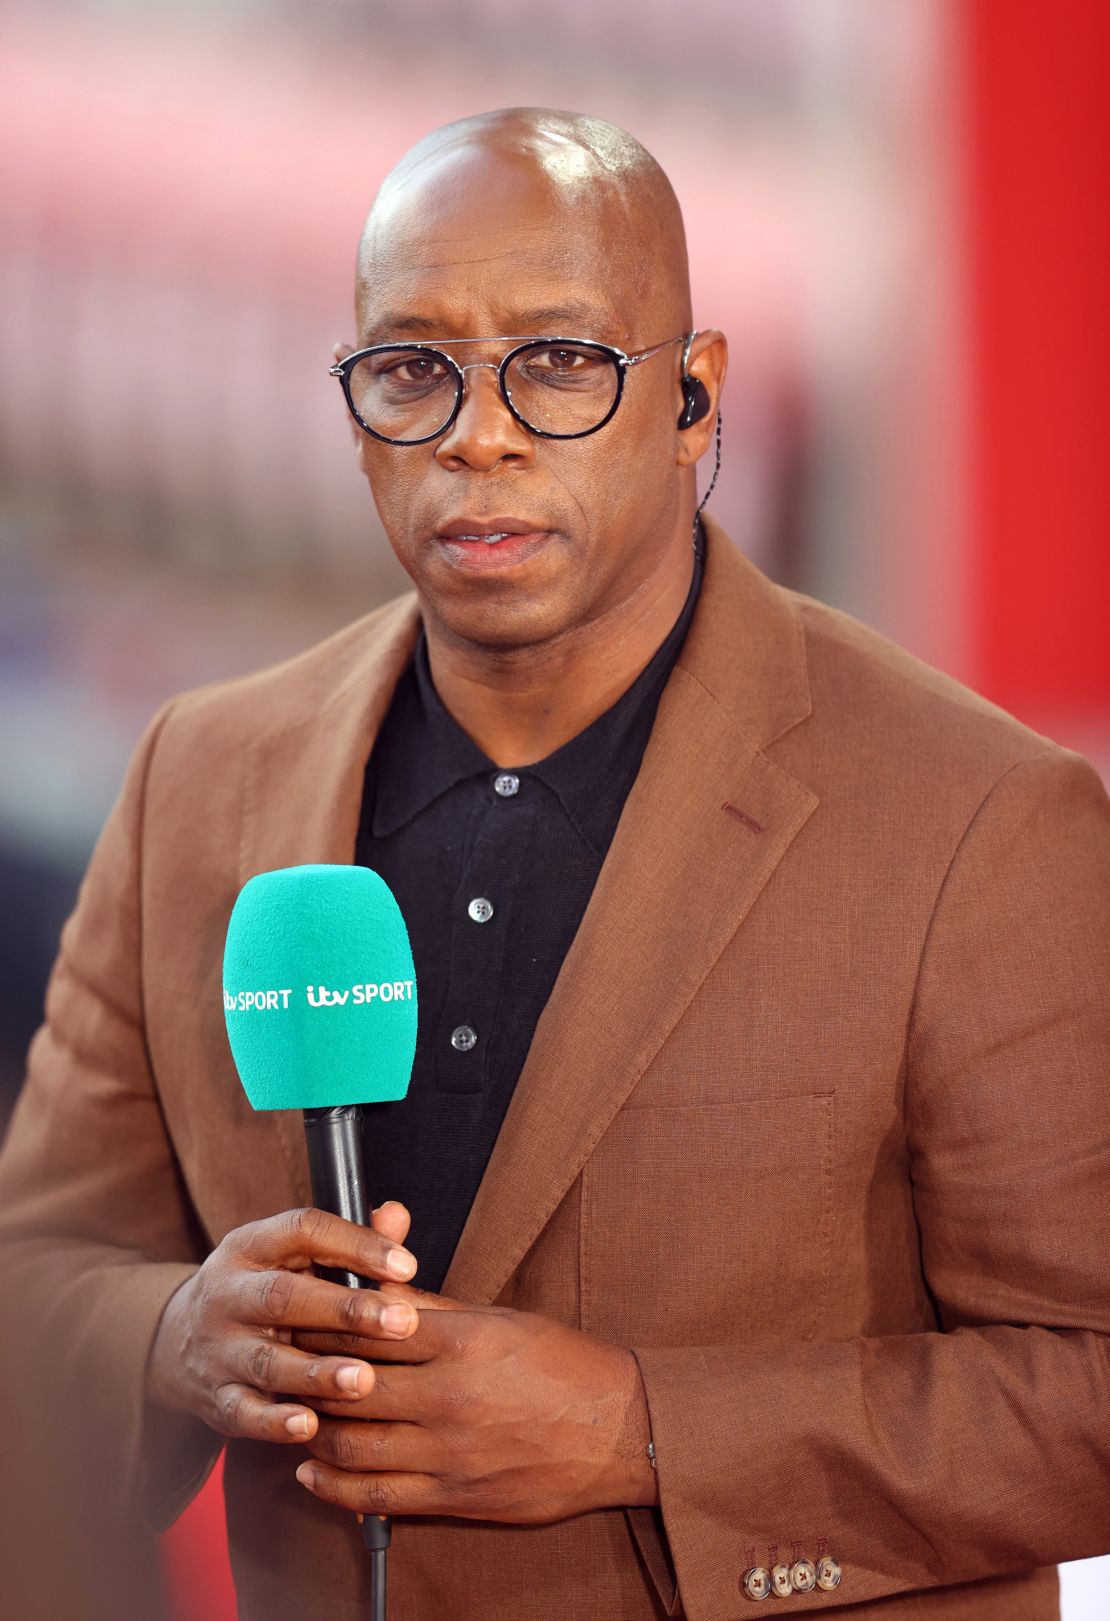 Ian Wright played for Crystal Palace, Arsenal, West Ham, Nottingham Forest Celtic and Burnley as well as the England national team.